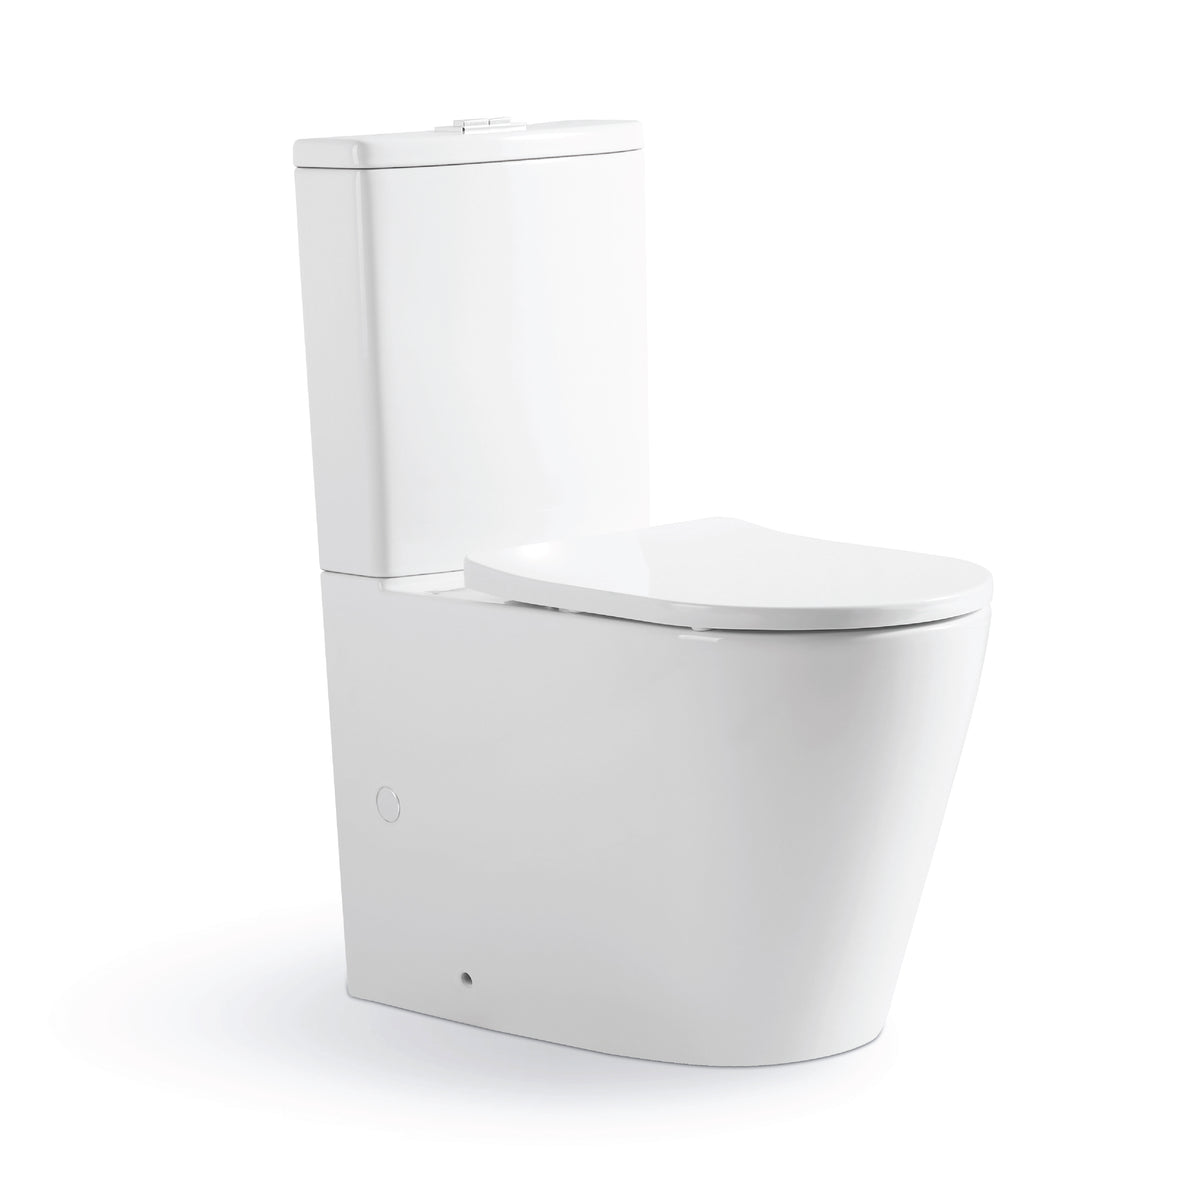 Tornado V3: The toilet of choice – silent, powerful flush, 4-star water efficiency, comfort height pan, non-marking design, and sleek aesthetics.